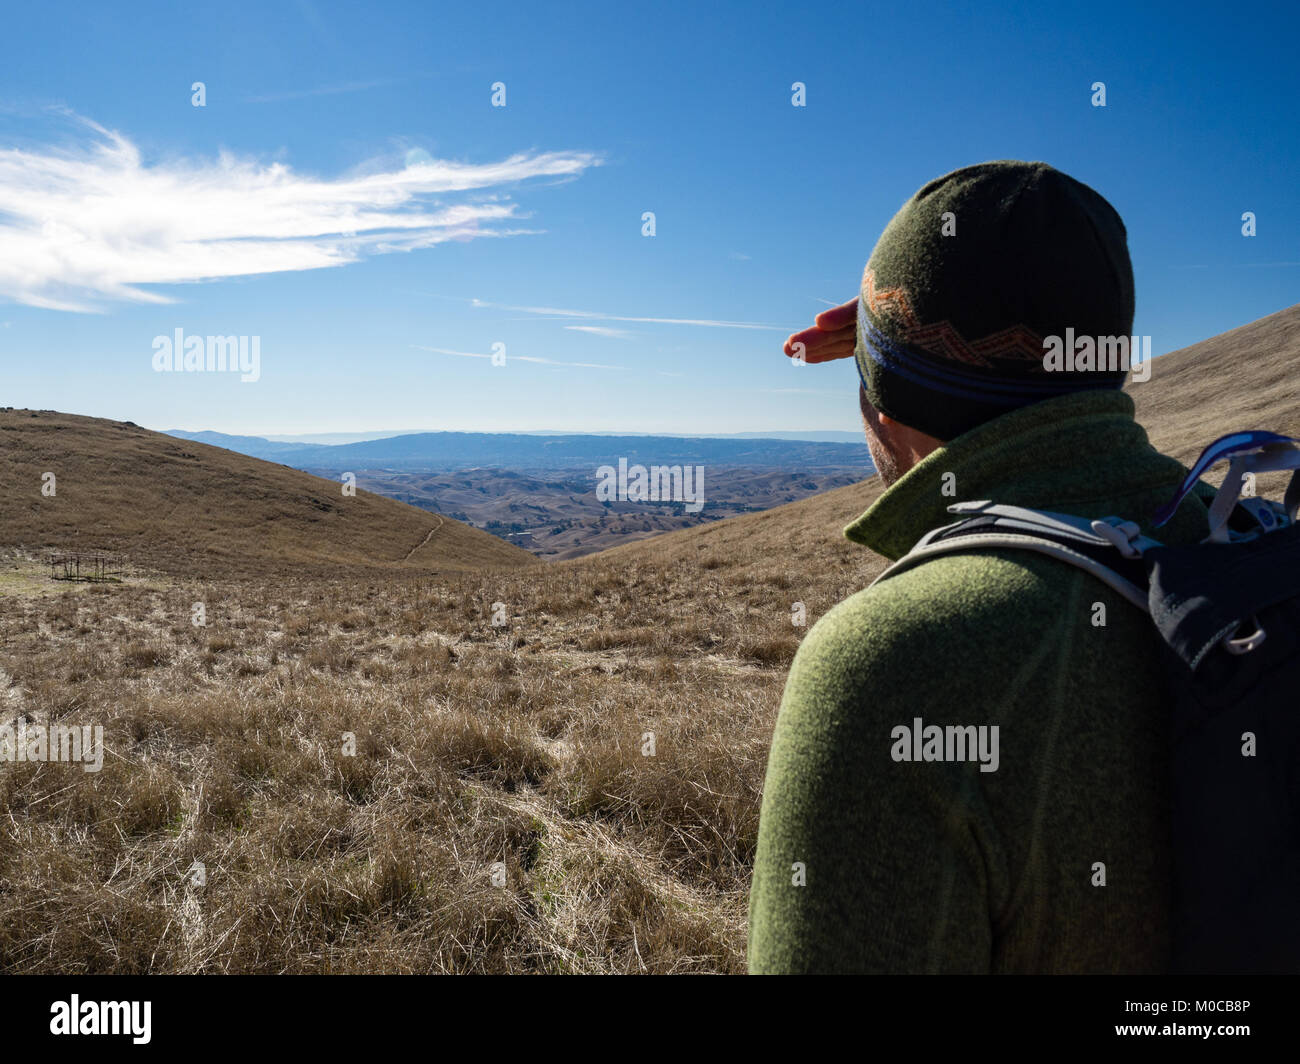 Adult man gazing into distance with eyes shielded toward sunny golden, grassy rolling hills in Morgan Territory Regional Preserve, California, fall Stock Photo